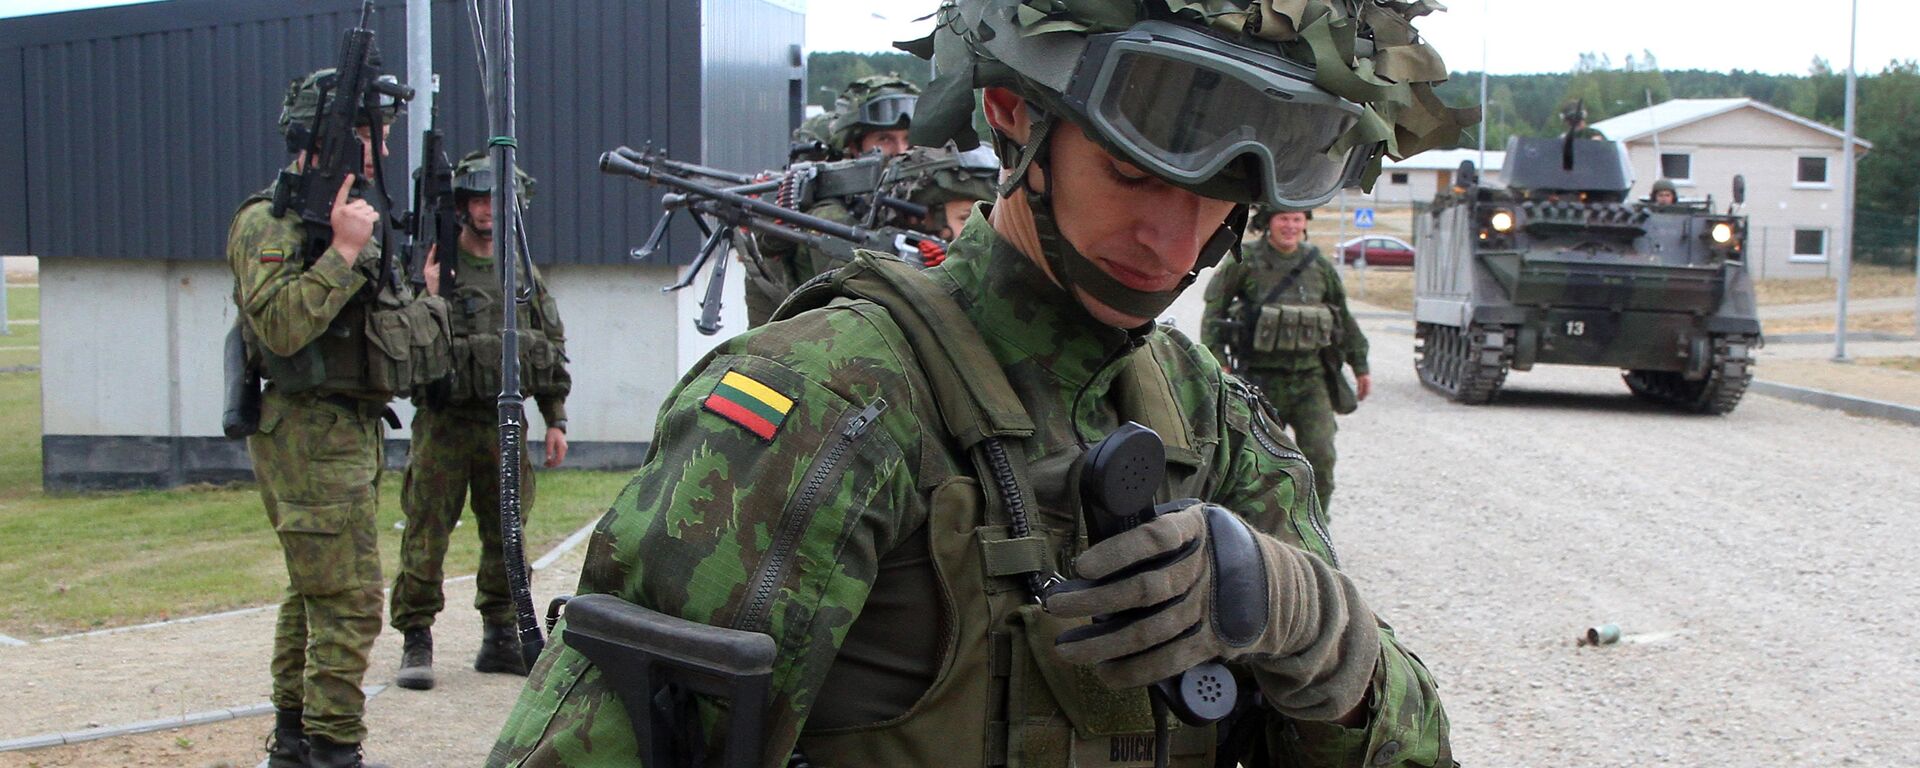 Lithuanian army soldiers take part in an exercise following the official opening of a military training centre for urban warfare in Pabrade, Lithuania, on August 30, 2016 - Sputnik International, 1920, 19.12.2021